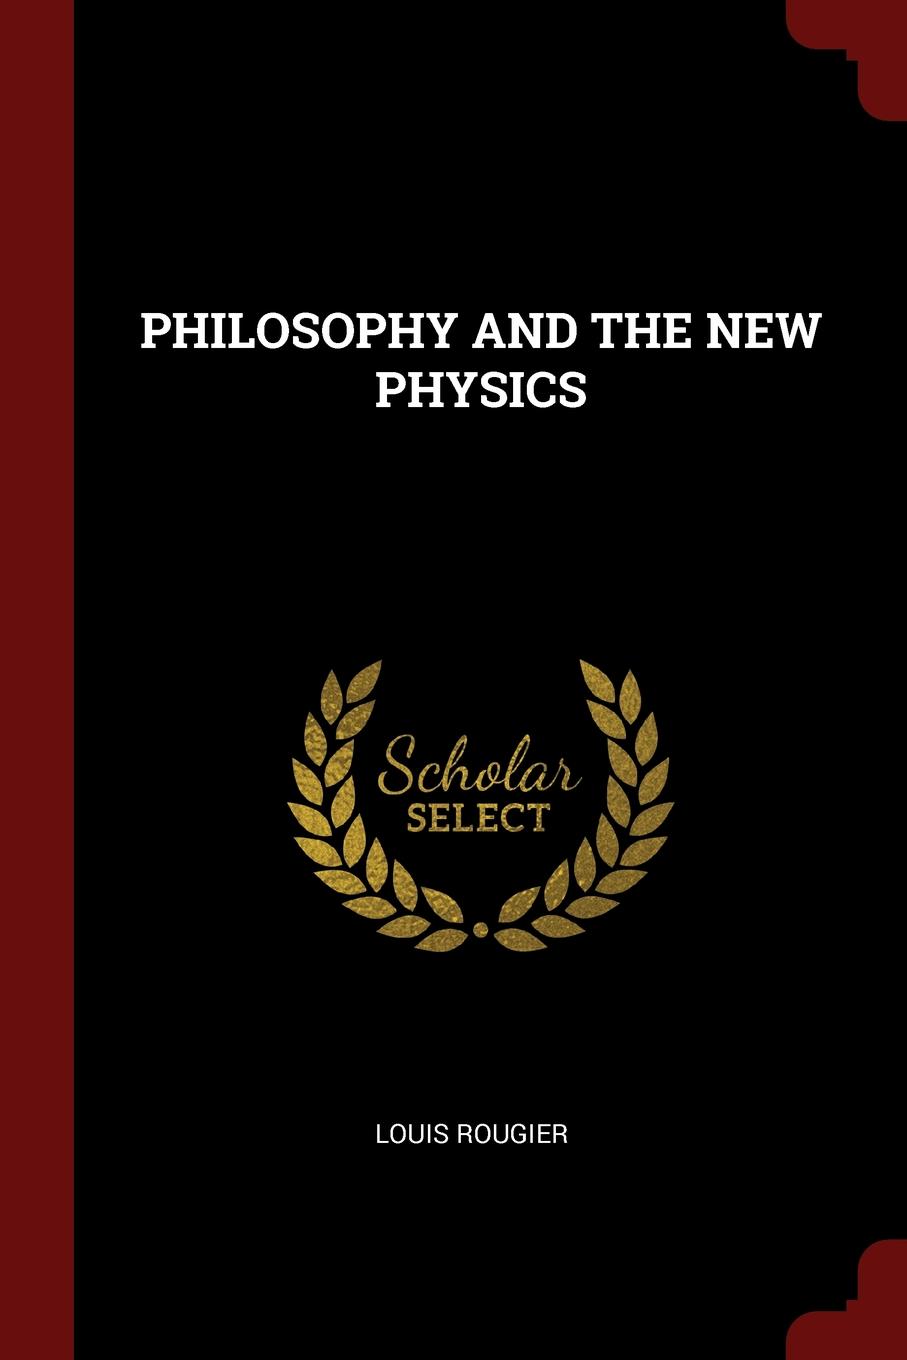 PHILOSOPHY AND THE NEW PHYSICS